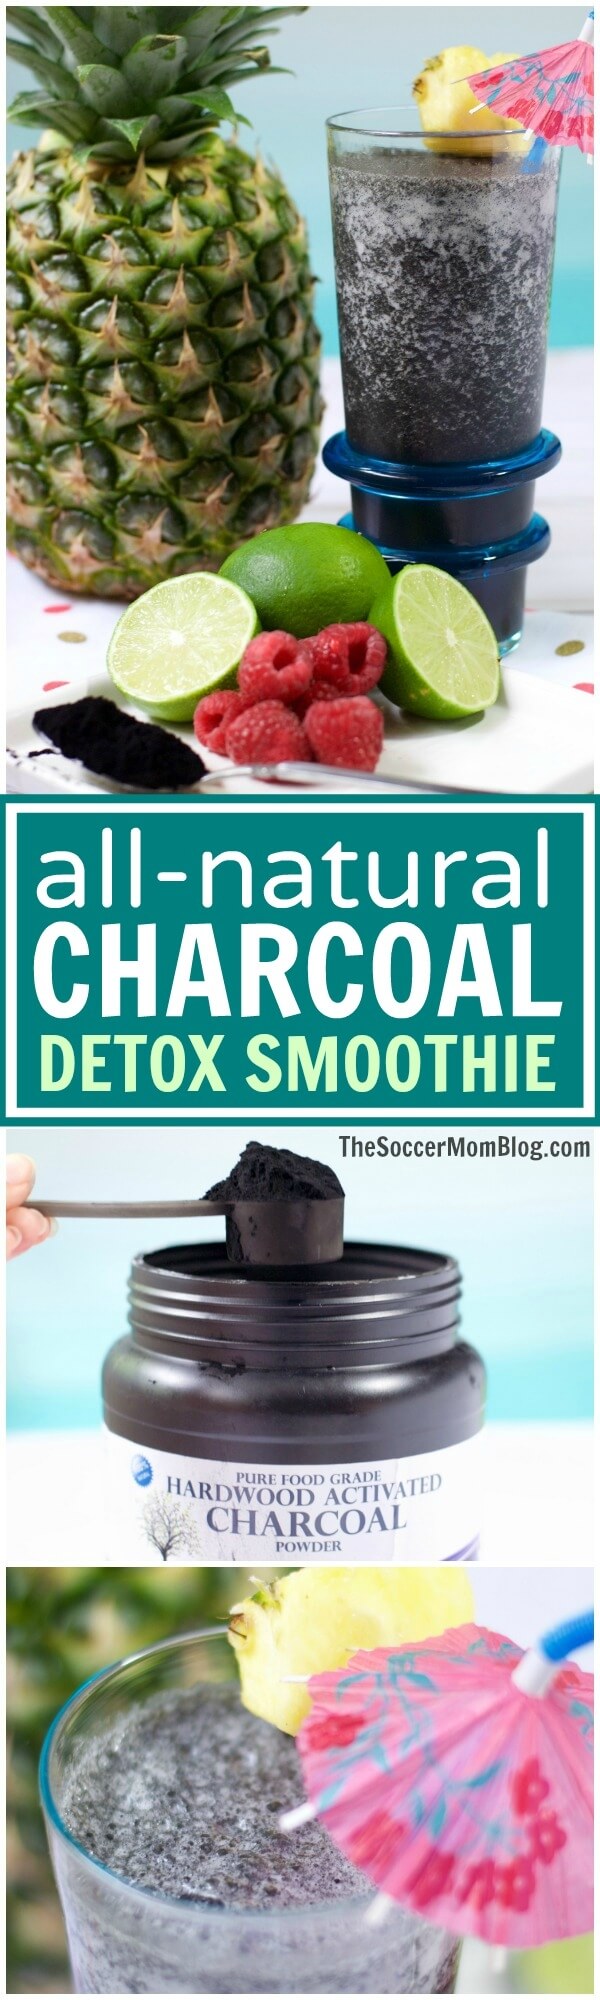 Don't be fooled by the jet-black color, this Charcoal Detox Smoothie is absolutely delicious and bursting with tropical fruit flavors & healthy ingredients!